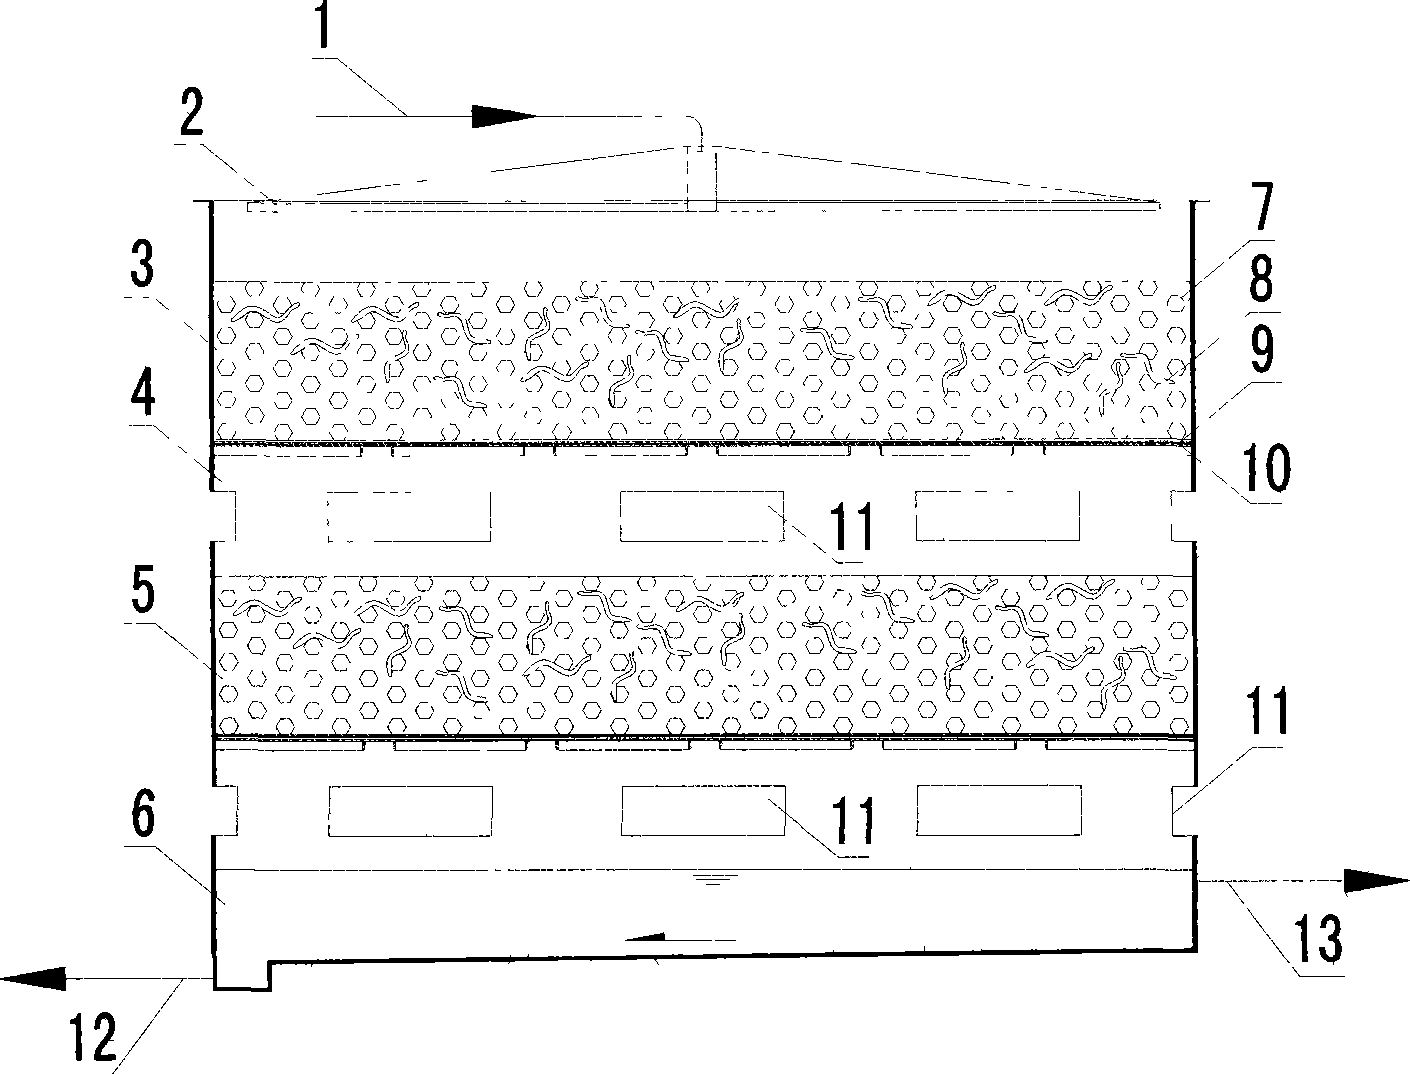 Method for treating rural disperse sewage by using high load vermibiofilter